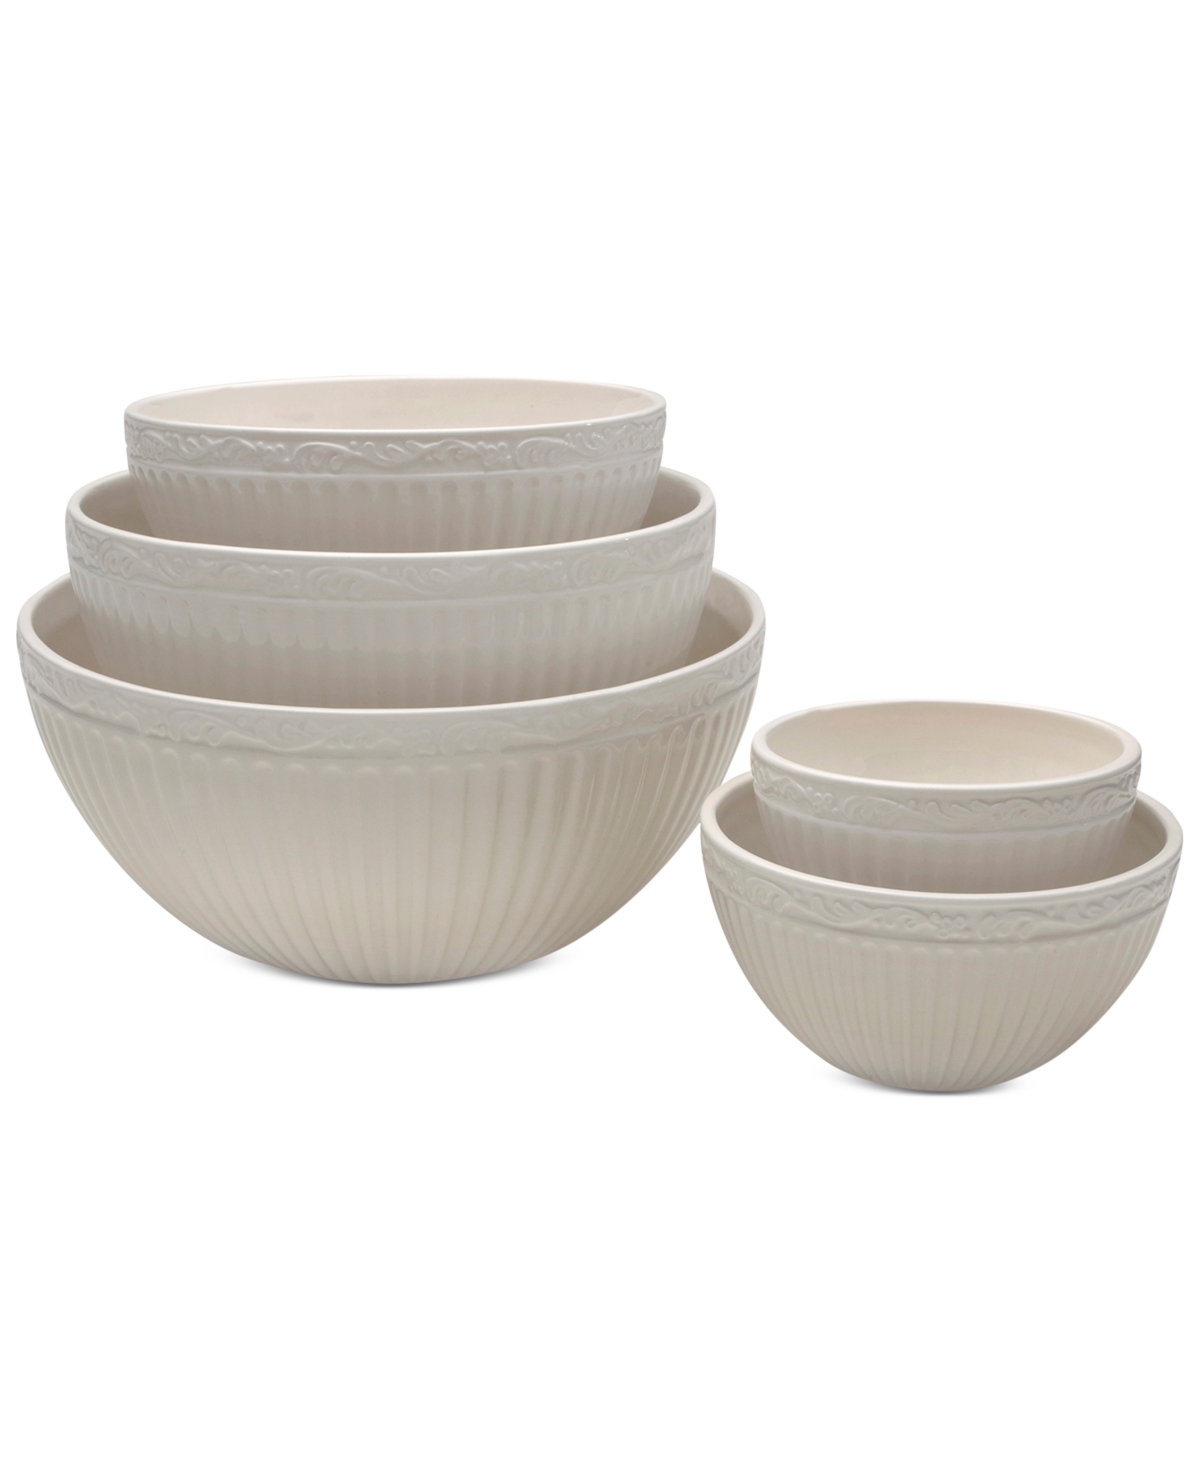 Italian Countryside Stacking Bowls